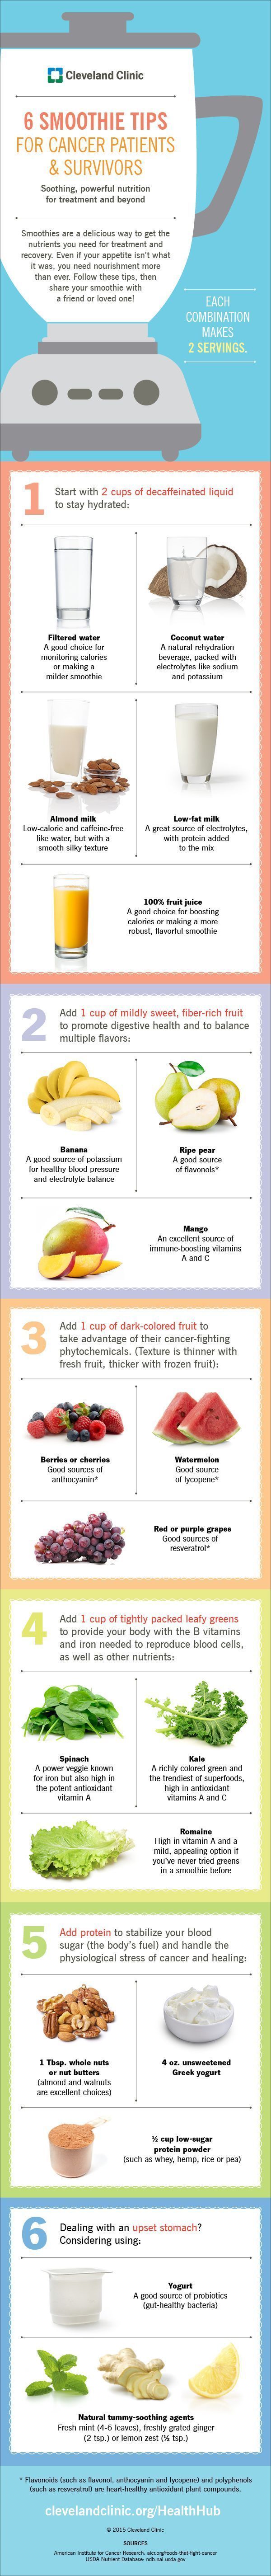 How to Make a Healthy Smoothie When You Have Cancer